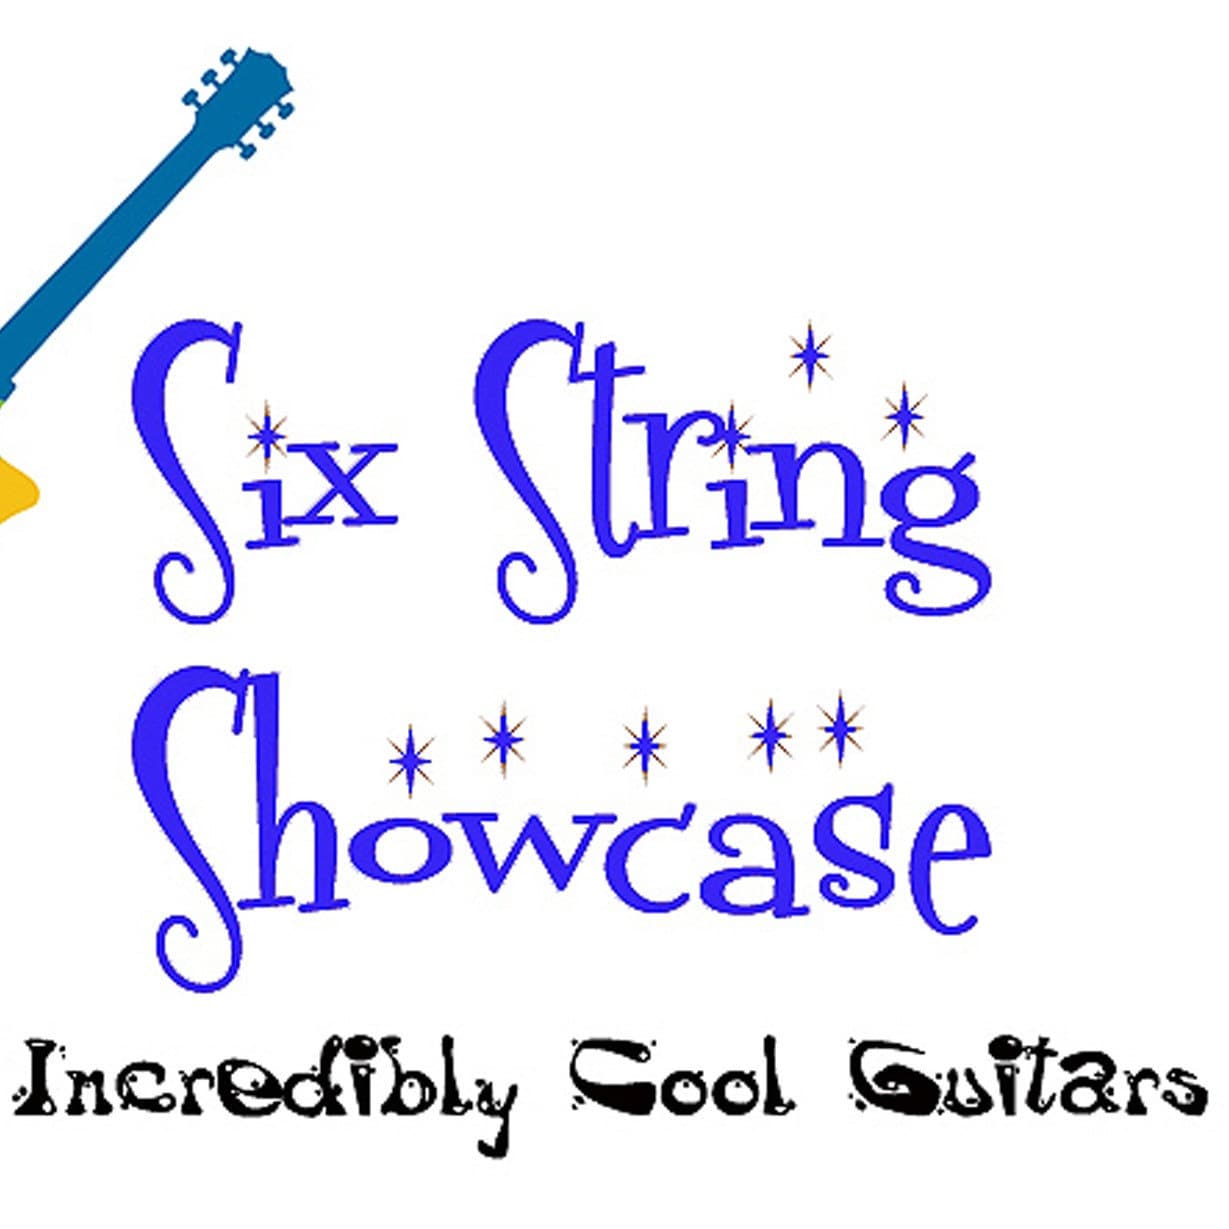 String-String FULL SHOWCASE AND INFORMATION